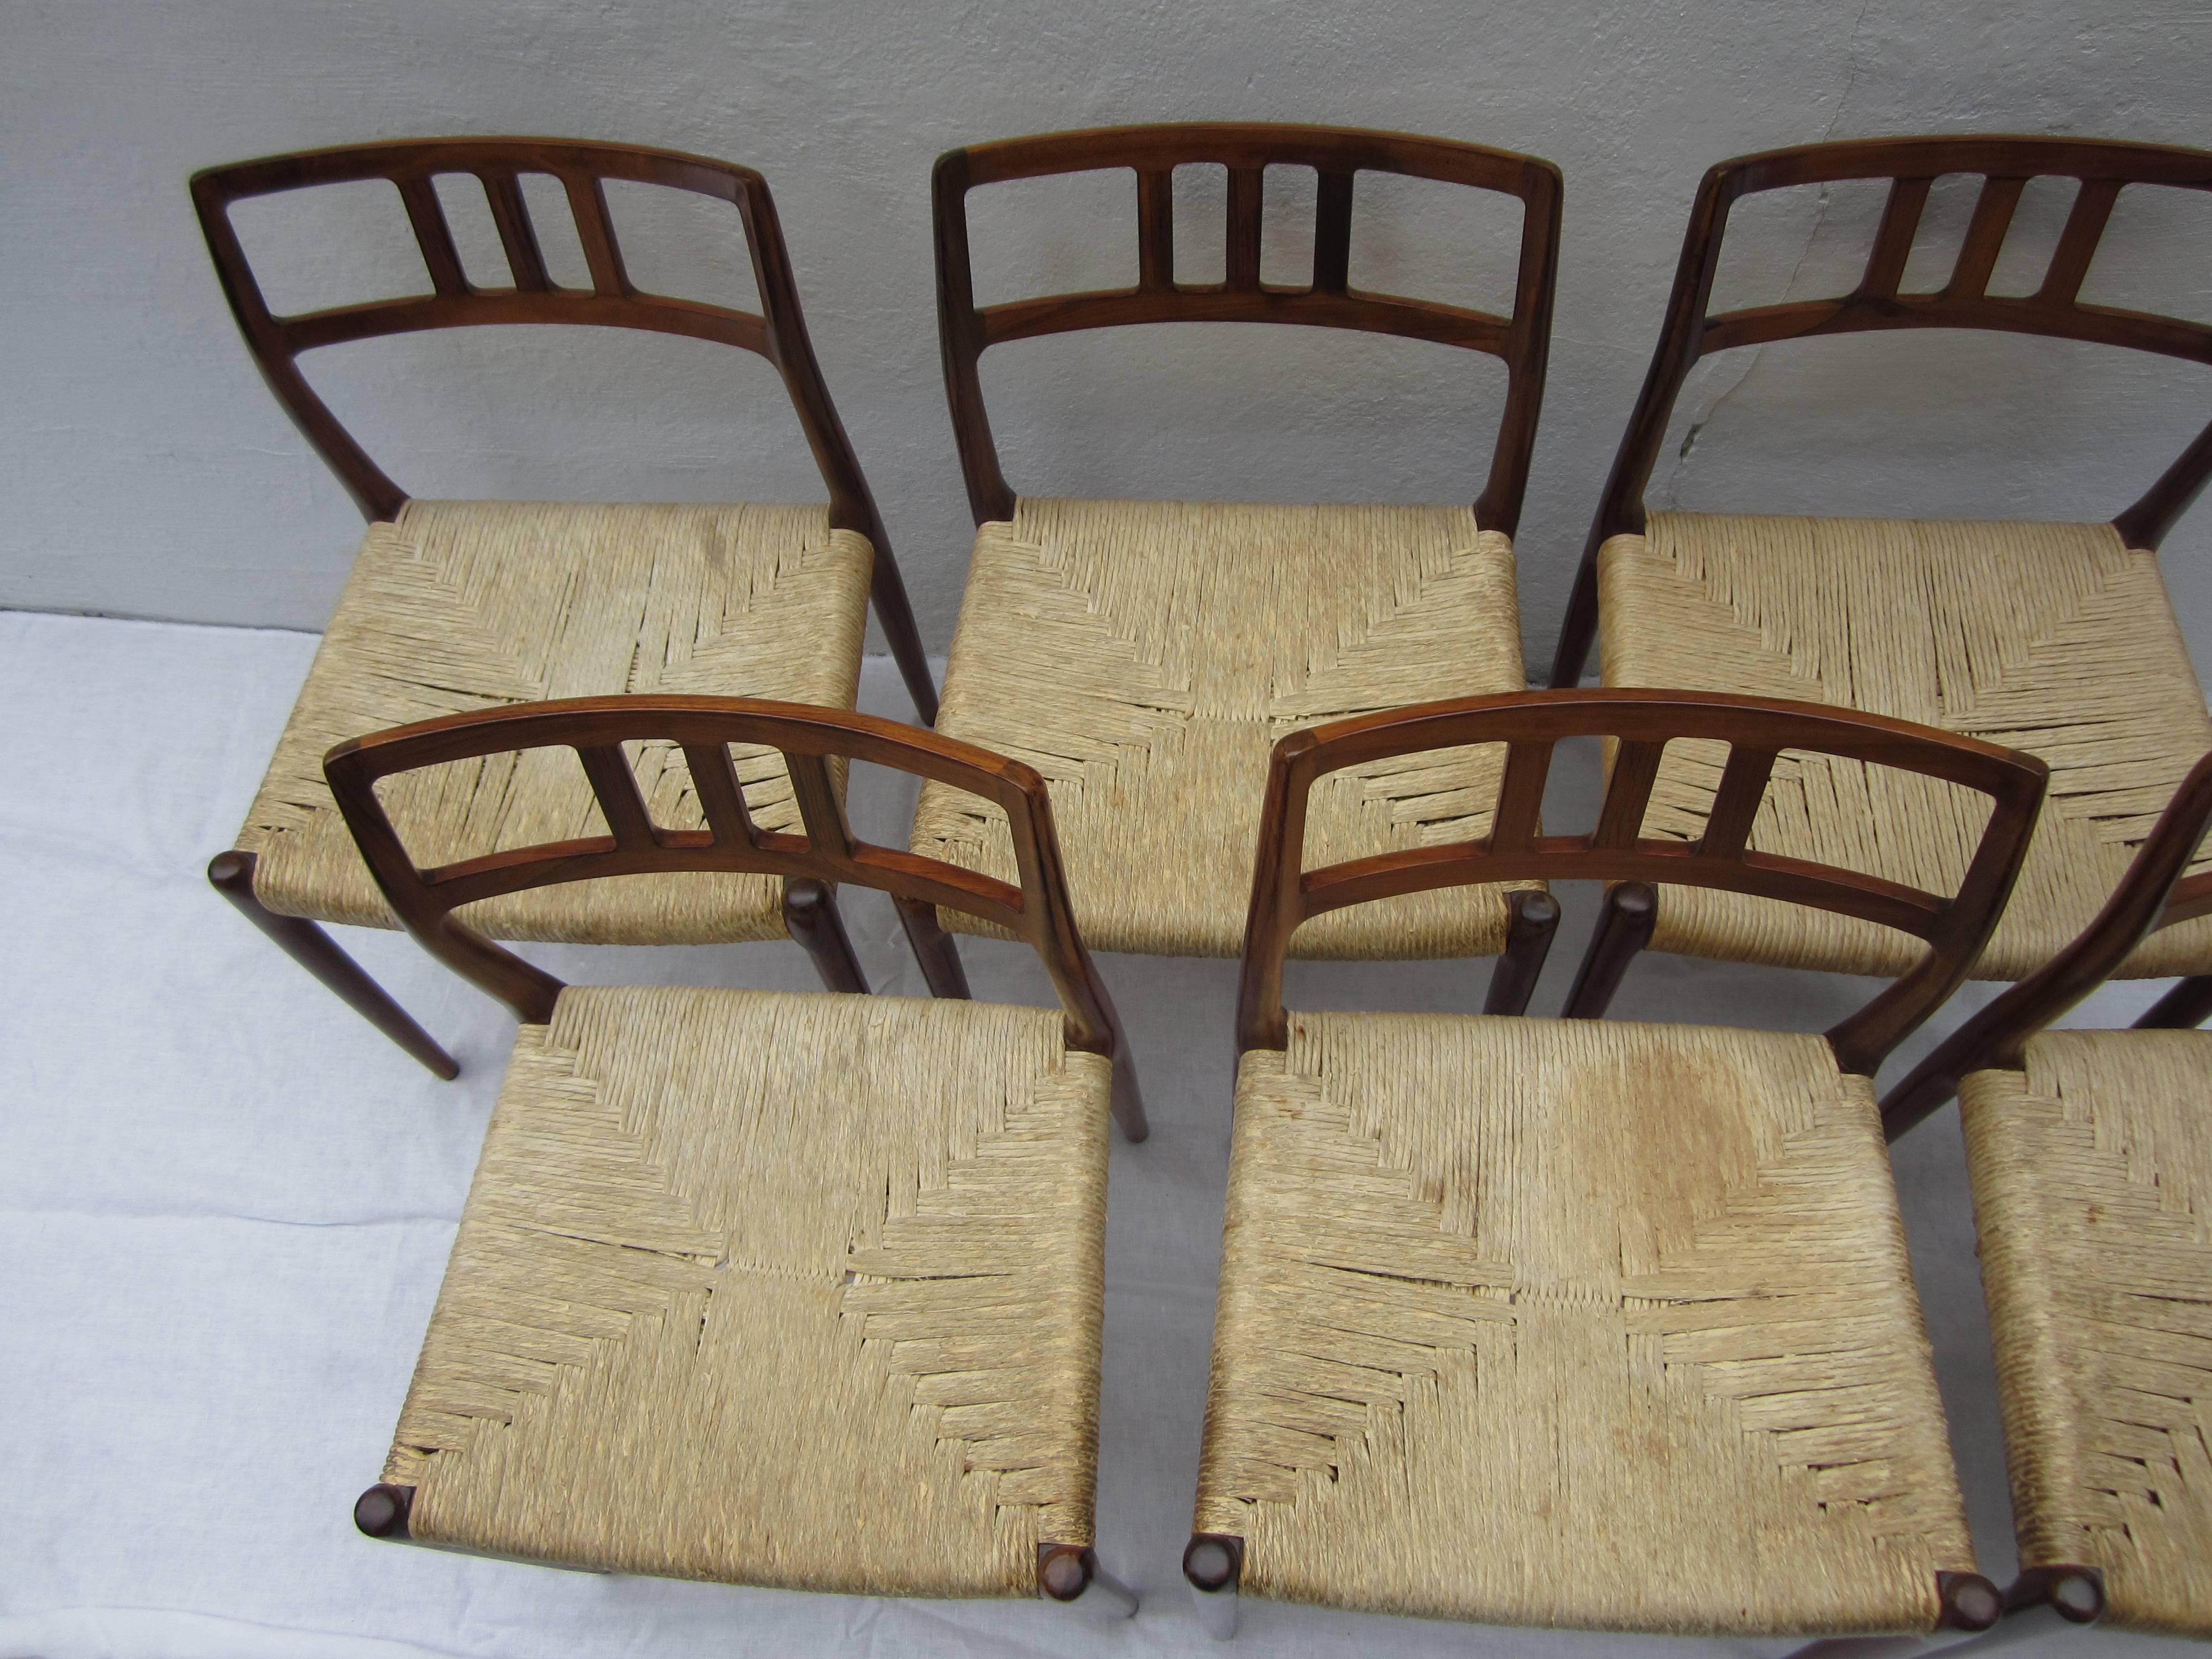 Great set of rosewood chairs with paper cord seats by Niels Otto Moller.